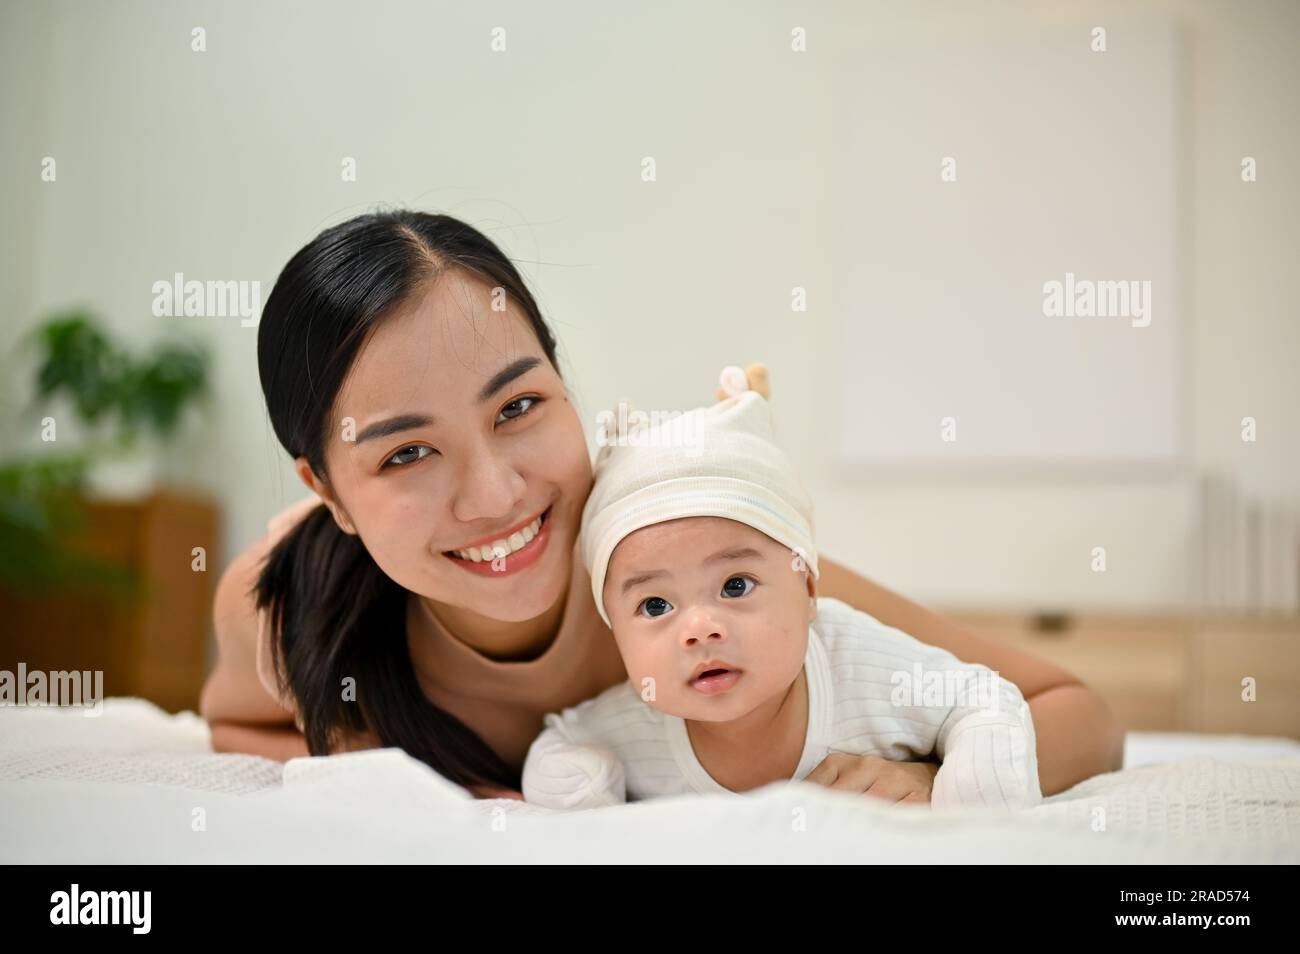 Sweet family moment. Young Asian mom lay down with her baby, smiling to camera. showing affection to her baby. Stock Photo